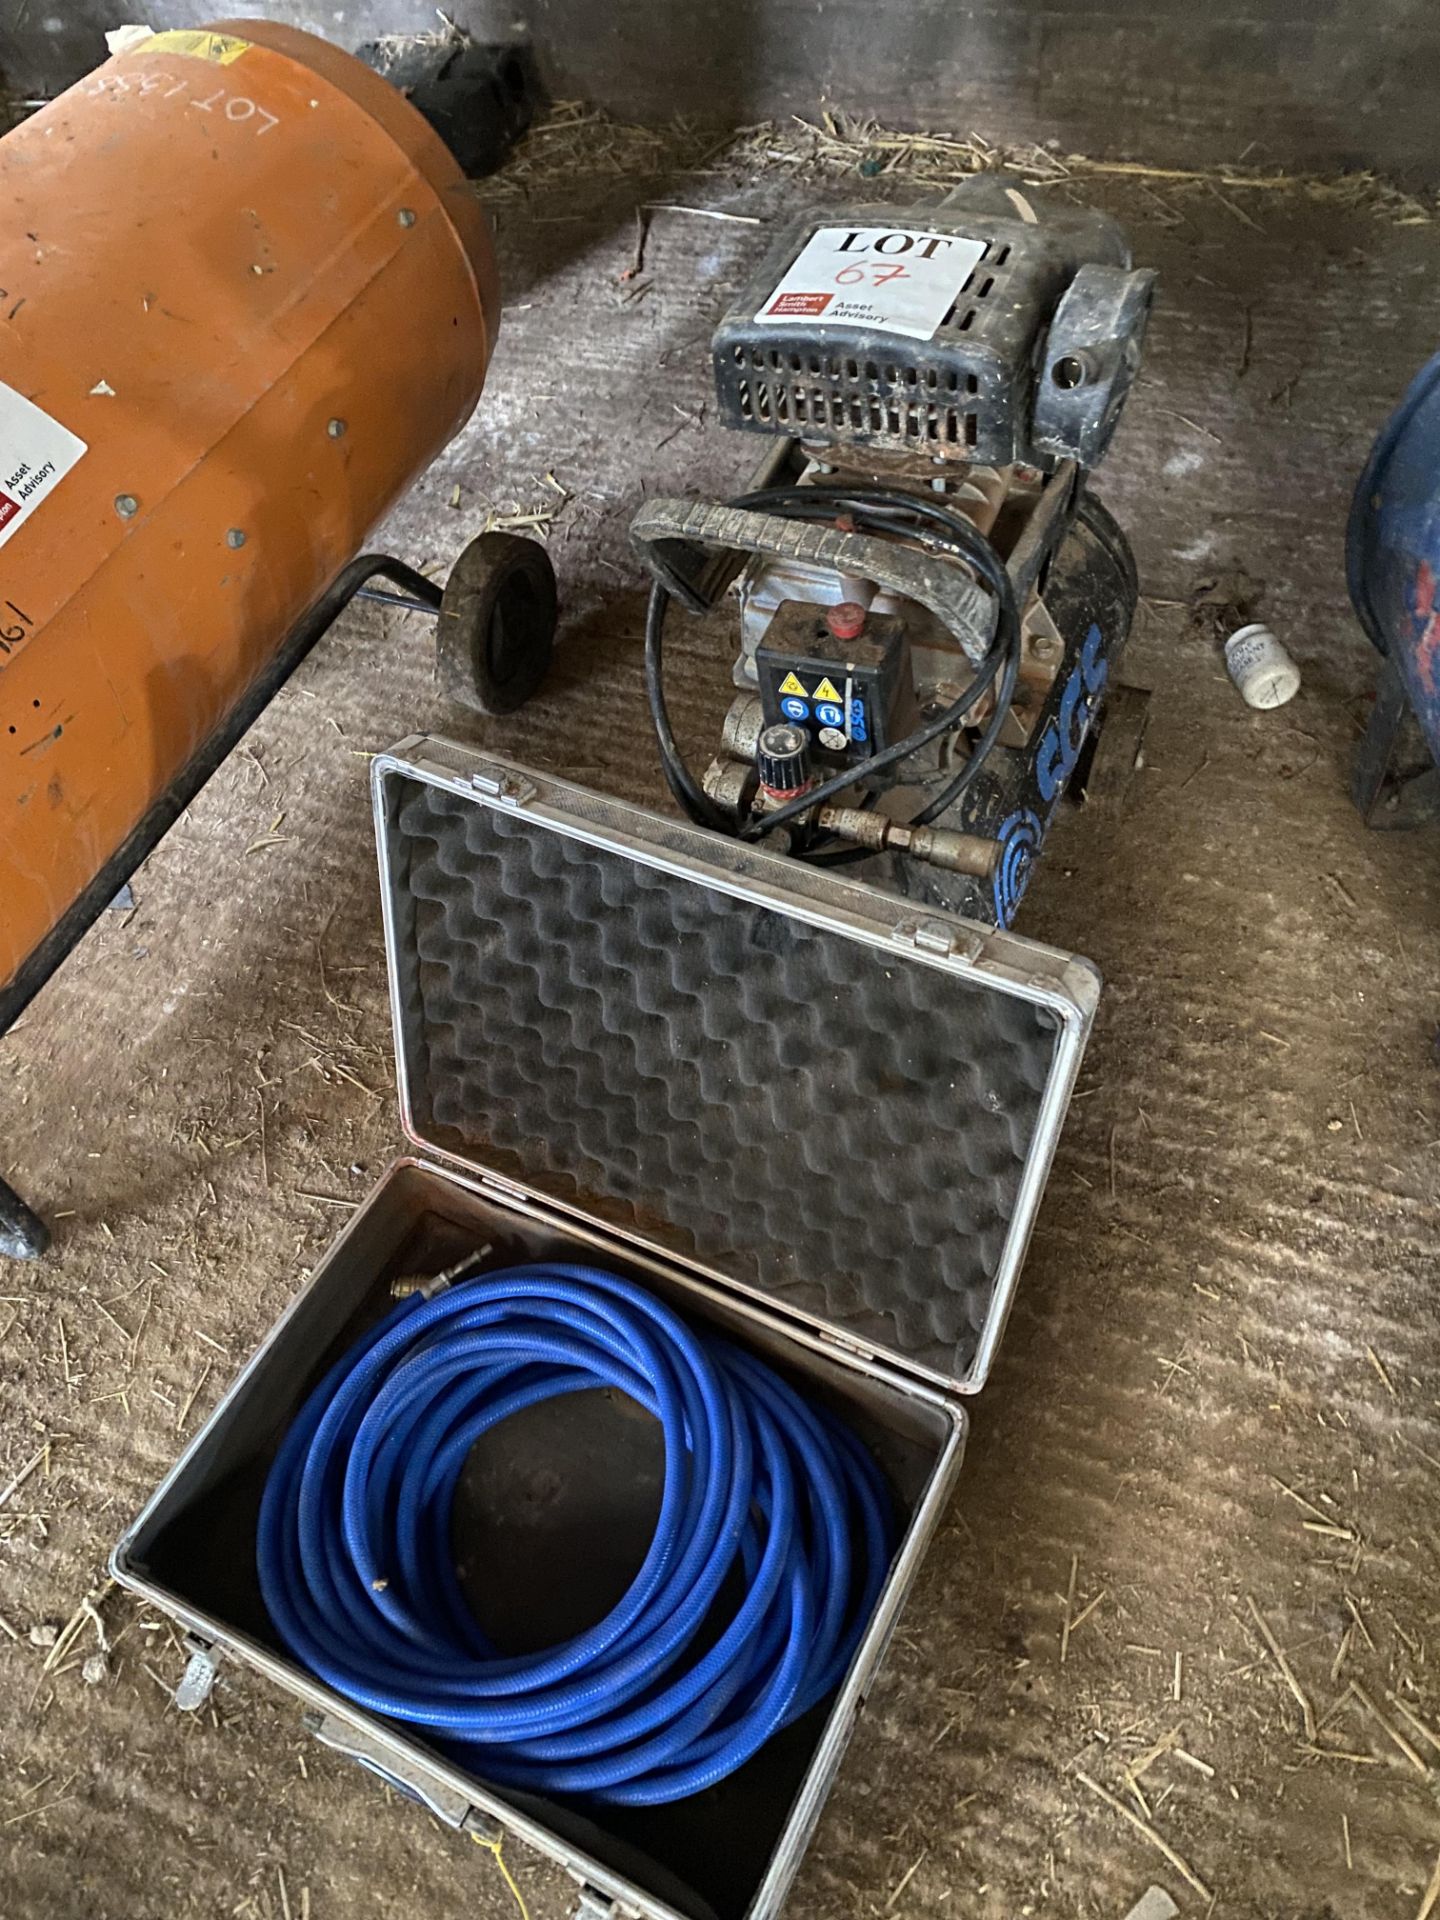 SGS portable air compressor, model SC24H, 2.5 HP, 240v with hose Located at Coleton Fishacre,